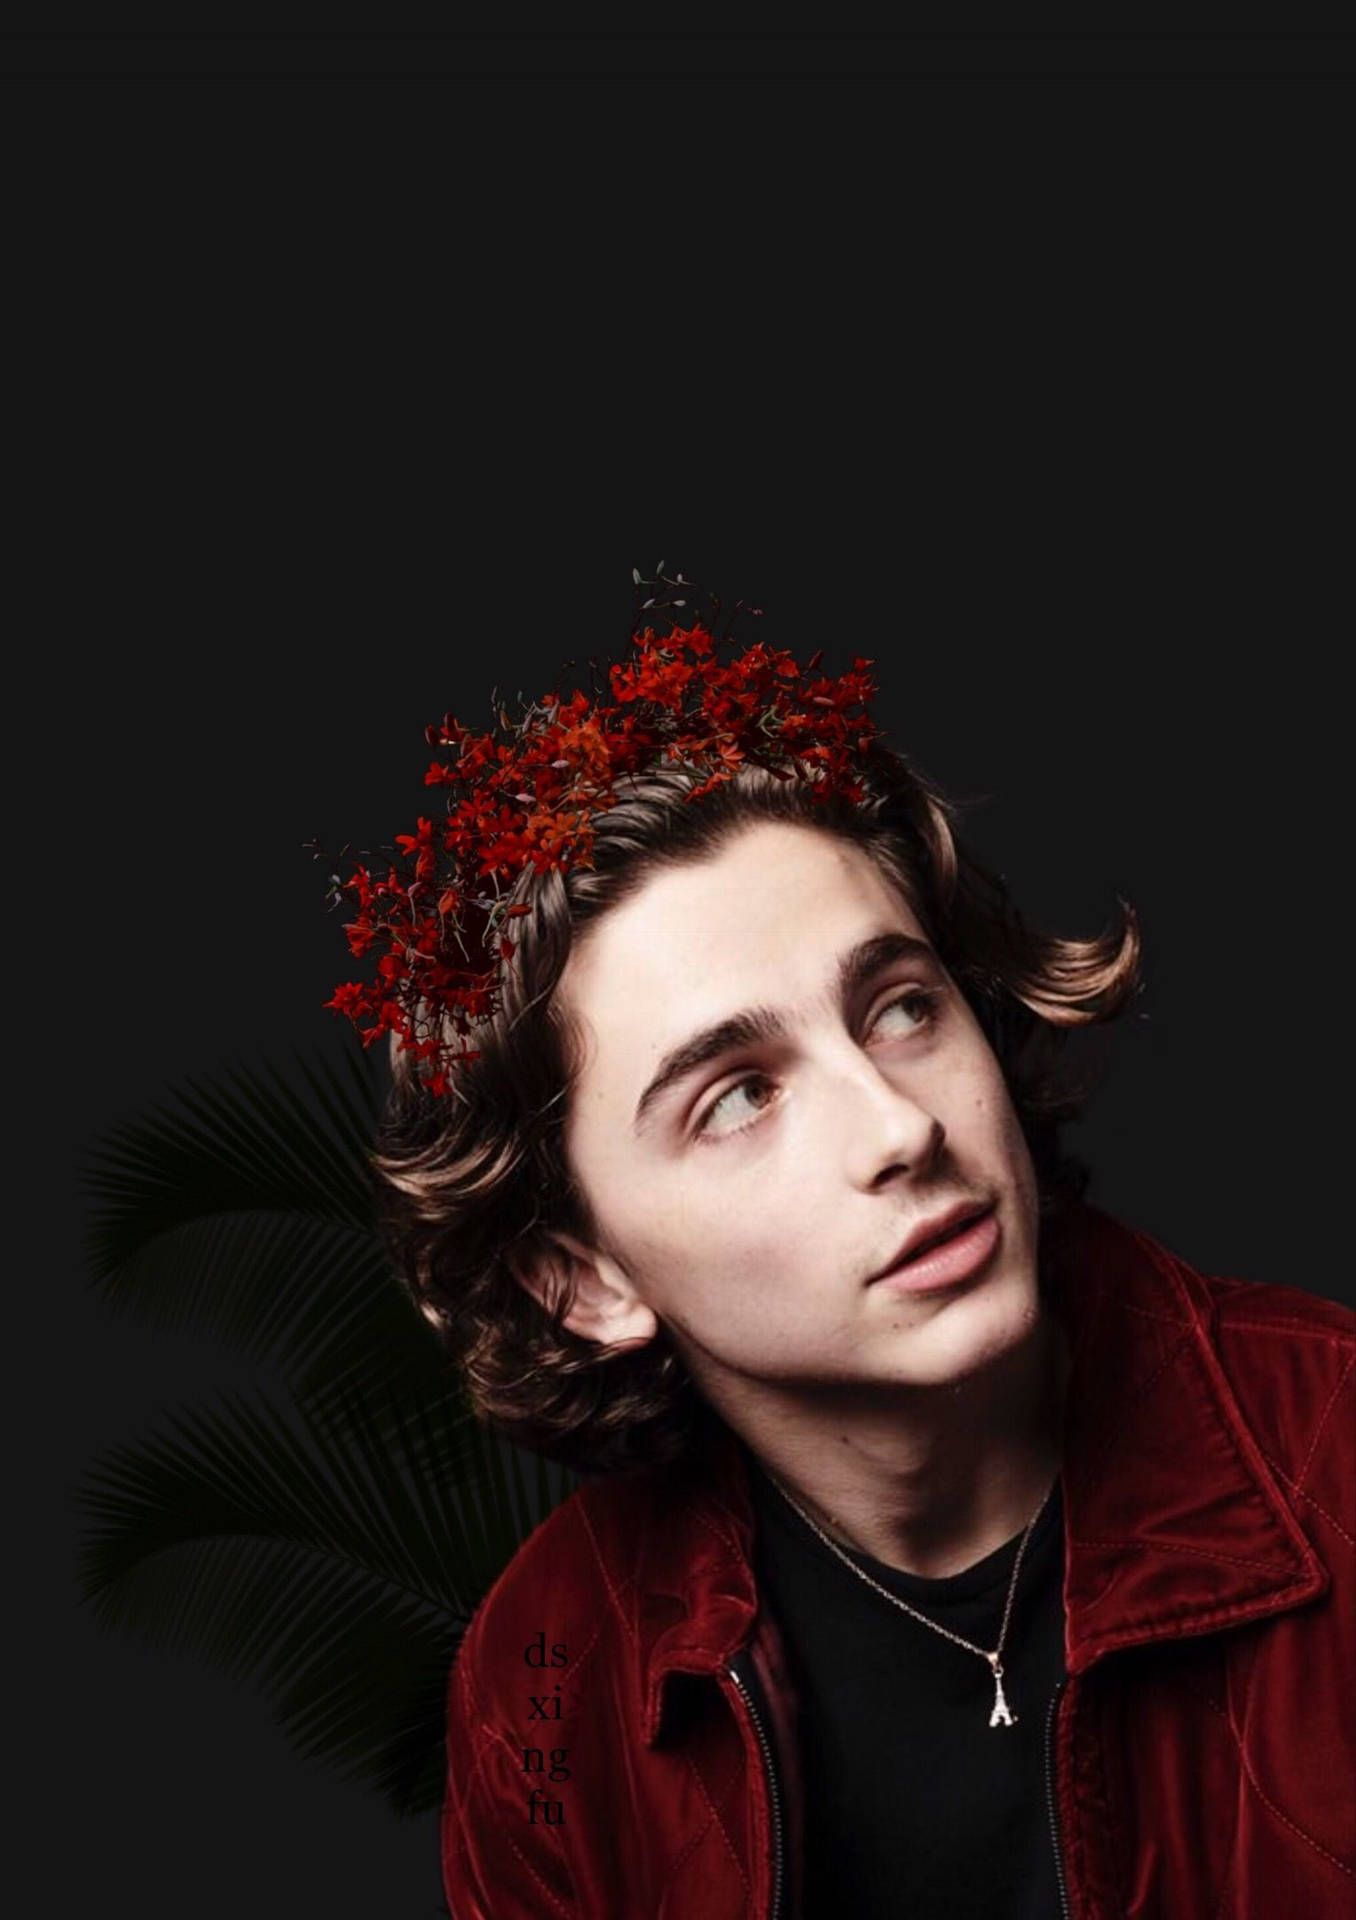 Timothee Chalamet with a red flower crown - Timothee Chalamet